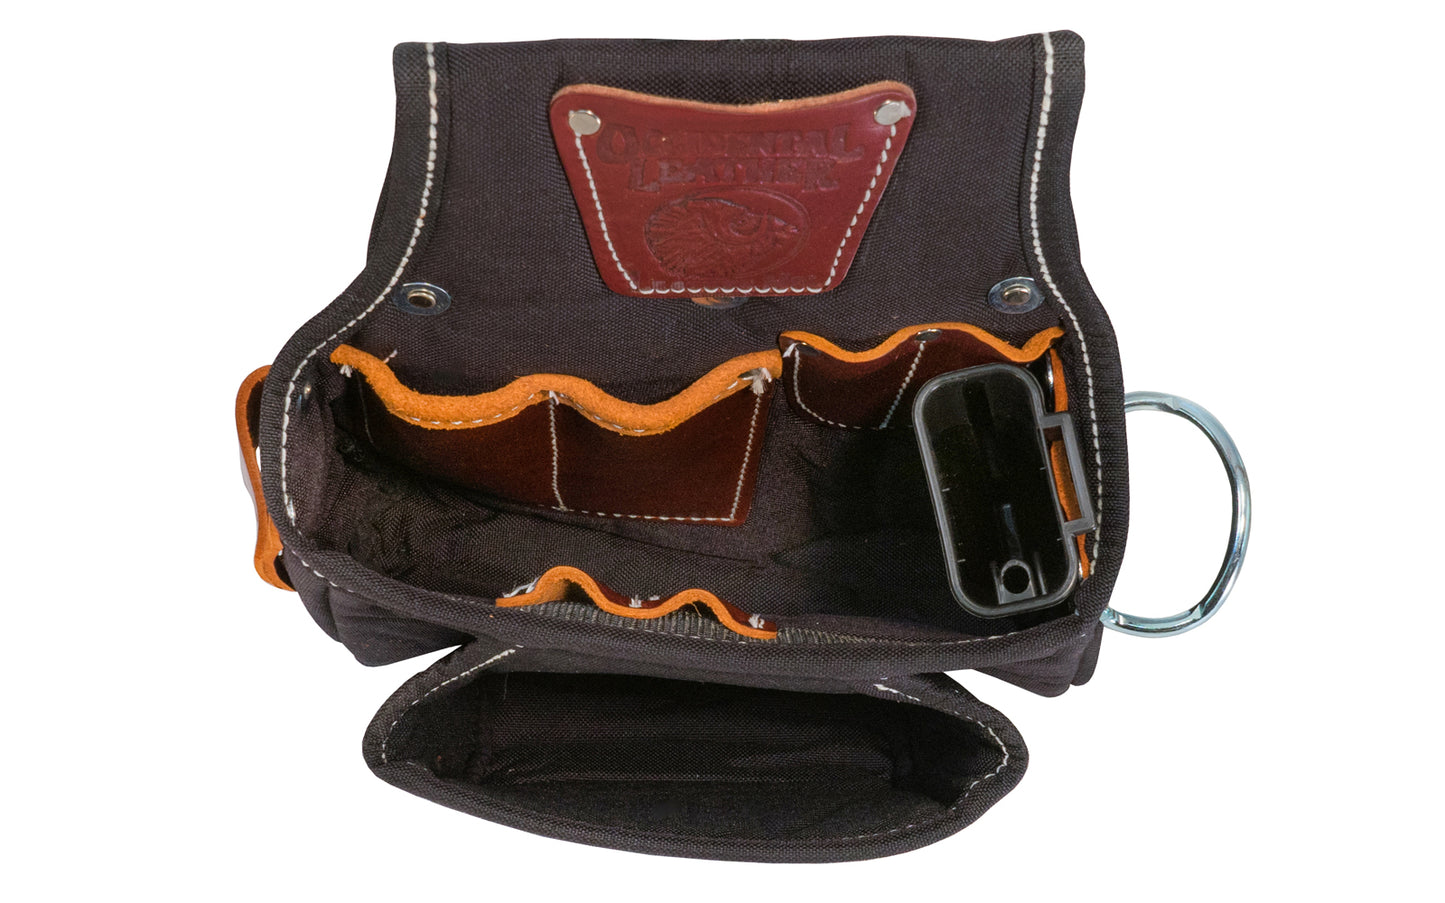 Occidental Leather "Oxy Finisher" Tool Bag ~ Model 9521 - Fits a 3" work belt - Pouch - Compact bag is ideal for trim, light framing & finish work. Innovative, round-bottom, full capacity, two-ply foam core main & outer bags hold shape empty or loaded. Made of industrial nylon material & genuine leather. 759244201901